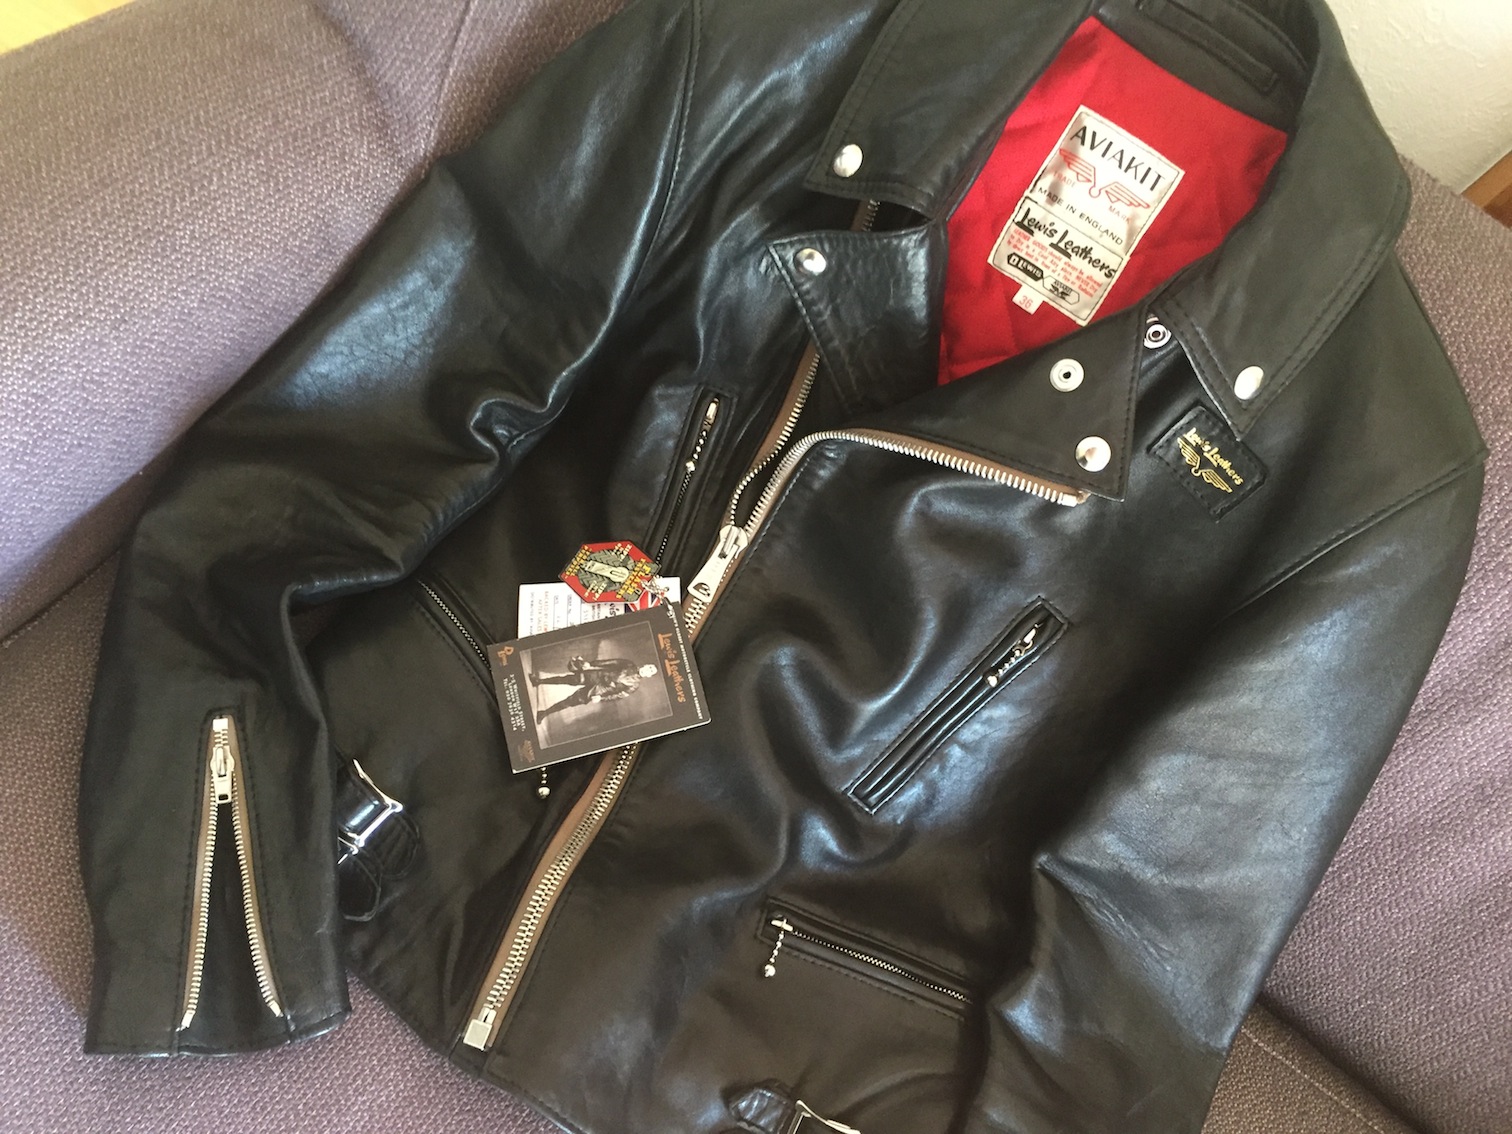 Lewis leathers / LIGHTNING 391 Tight Fit Sheep Skin perfect day